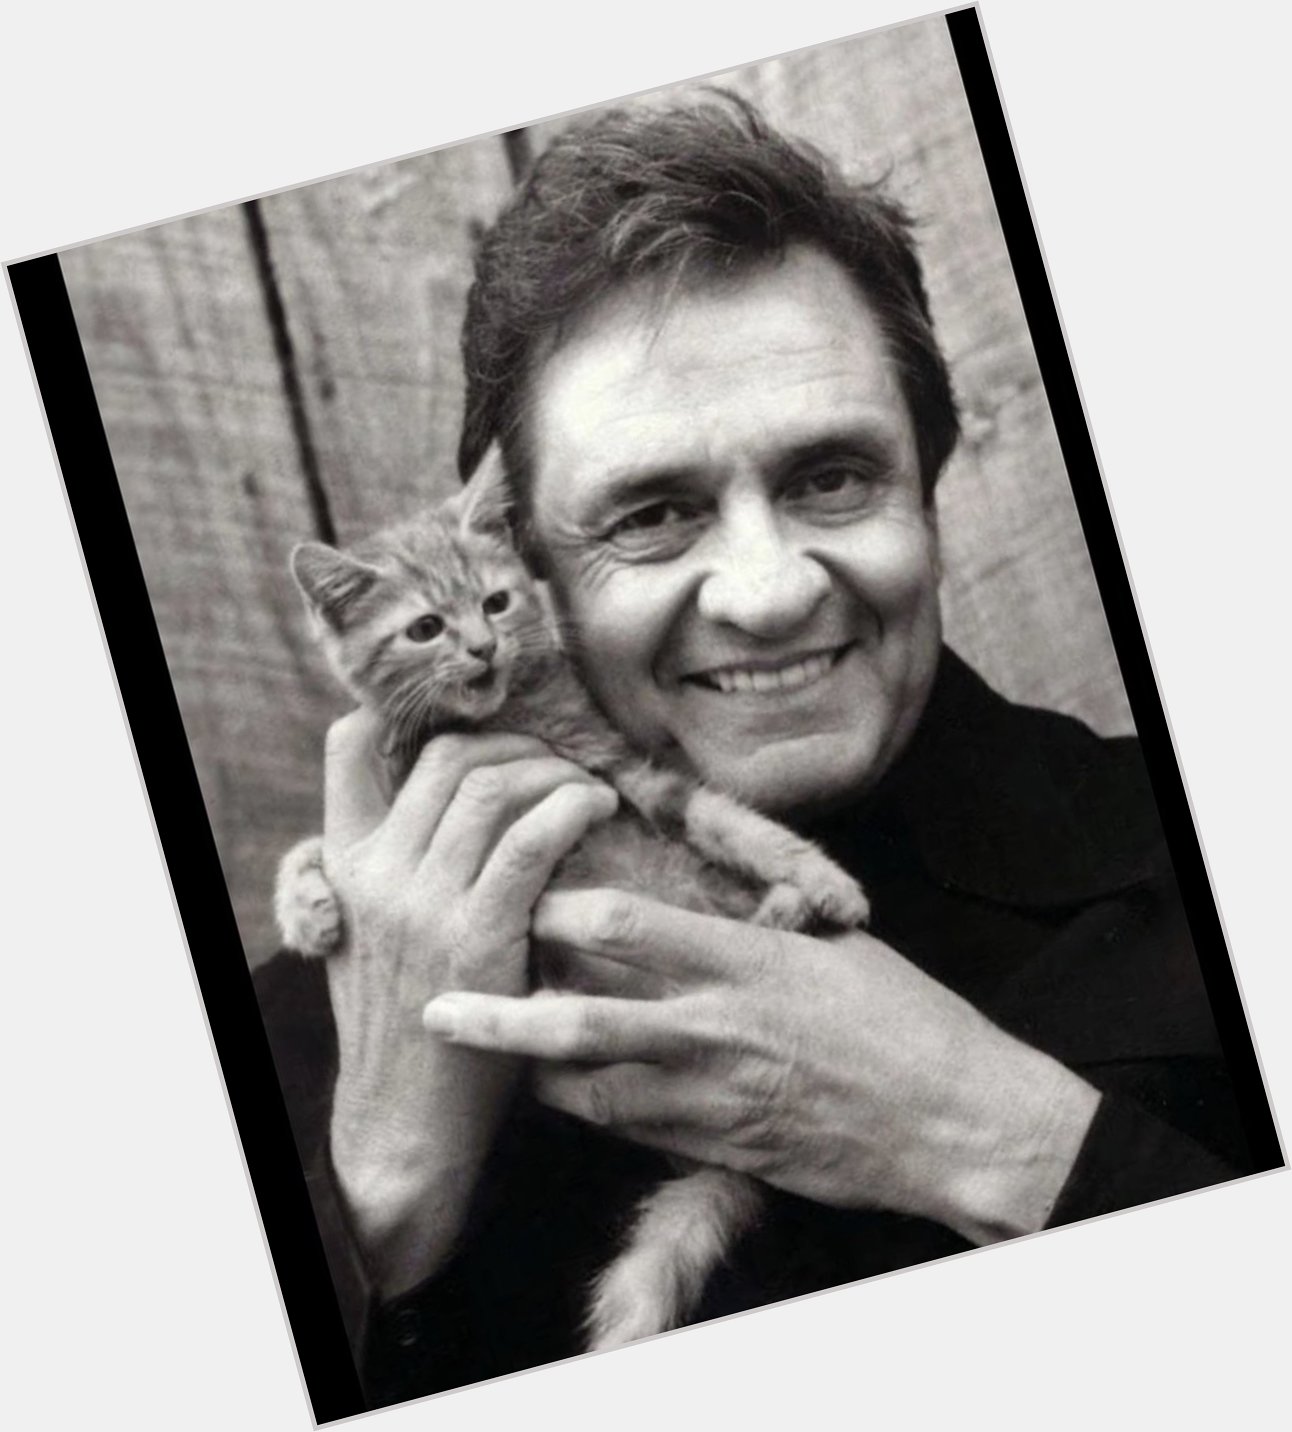 Happy birthday Johnny Cash one of my favorite musicians of all time 